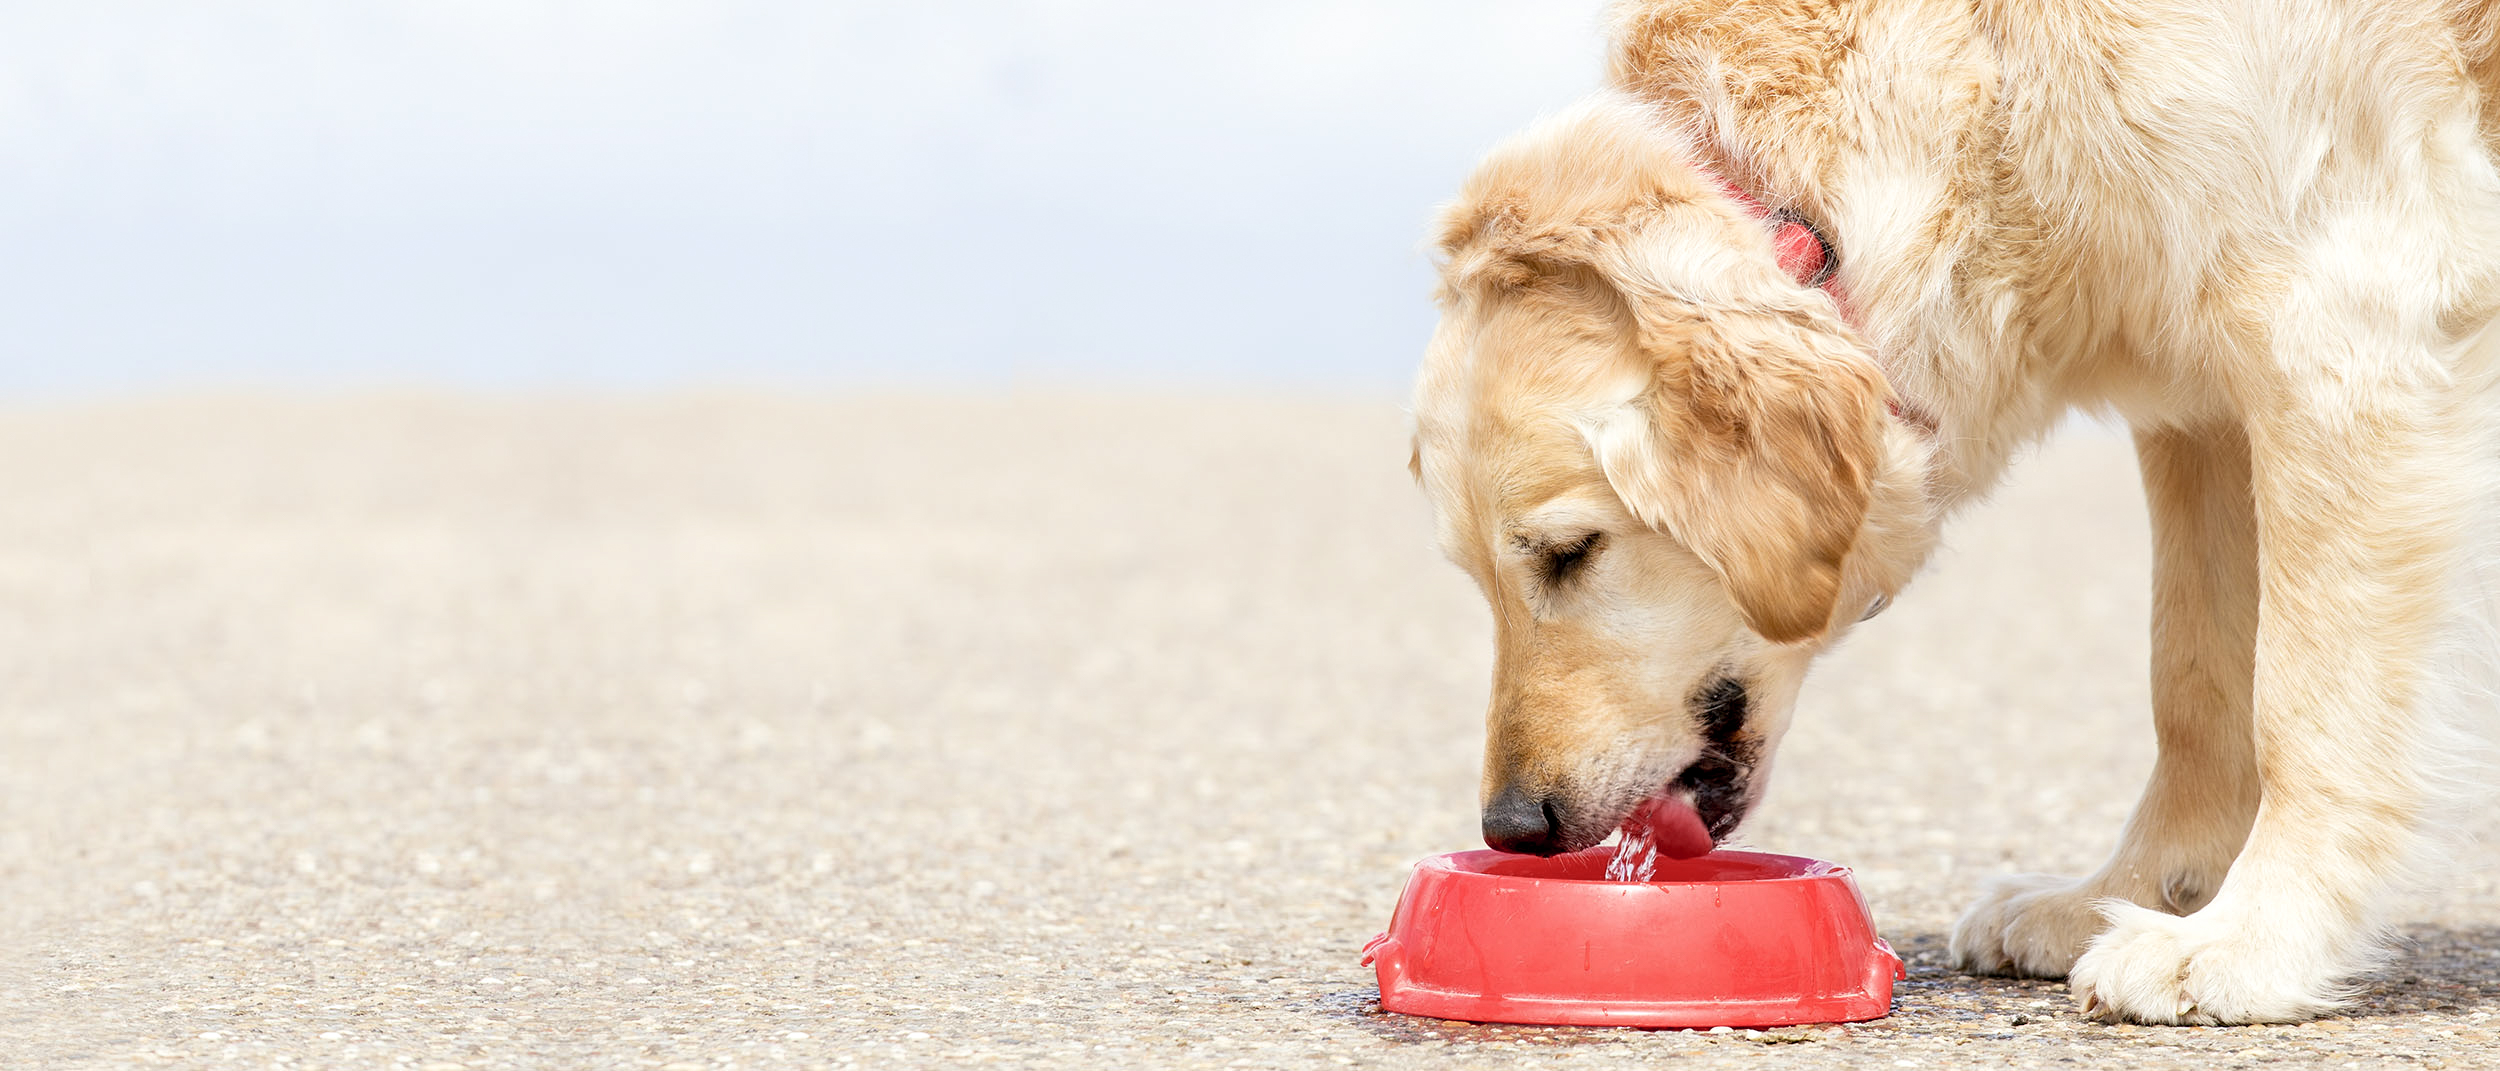 Adult Golden Retriever standing outdoors eating from a red bowl.